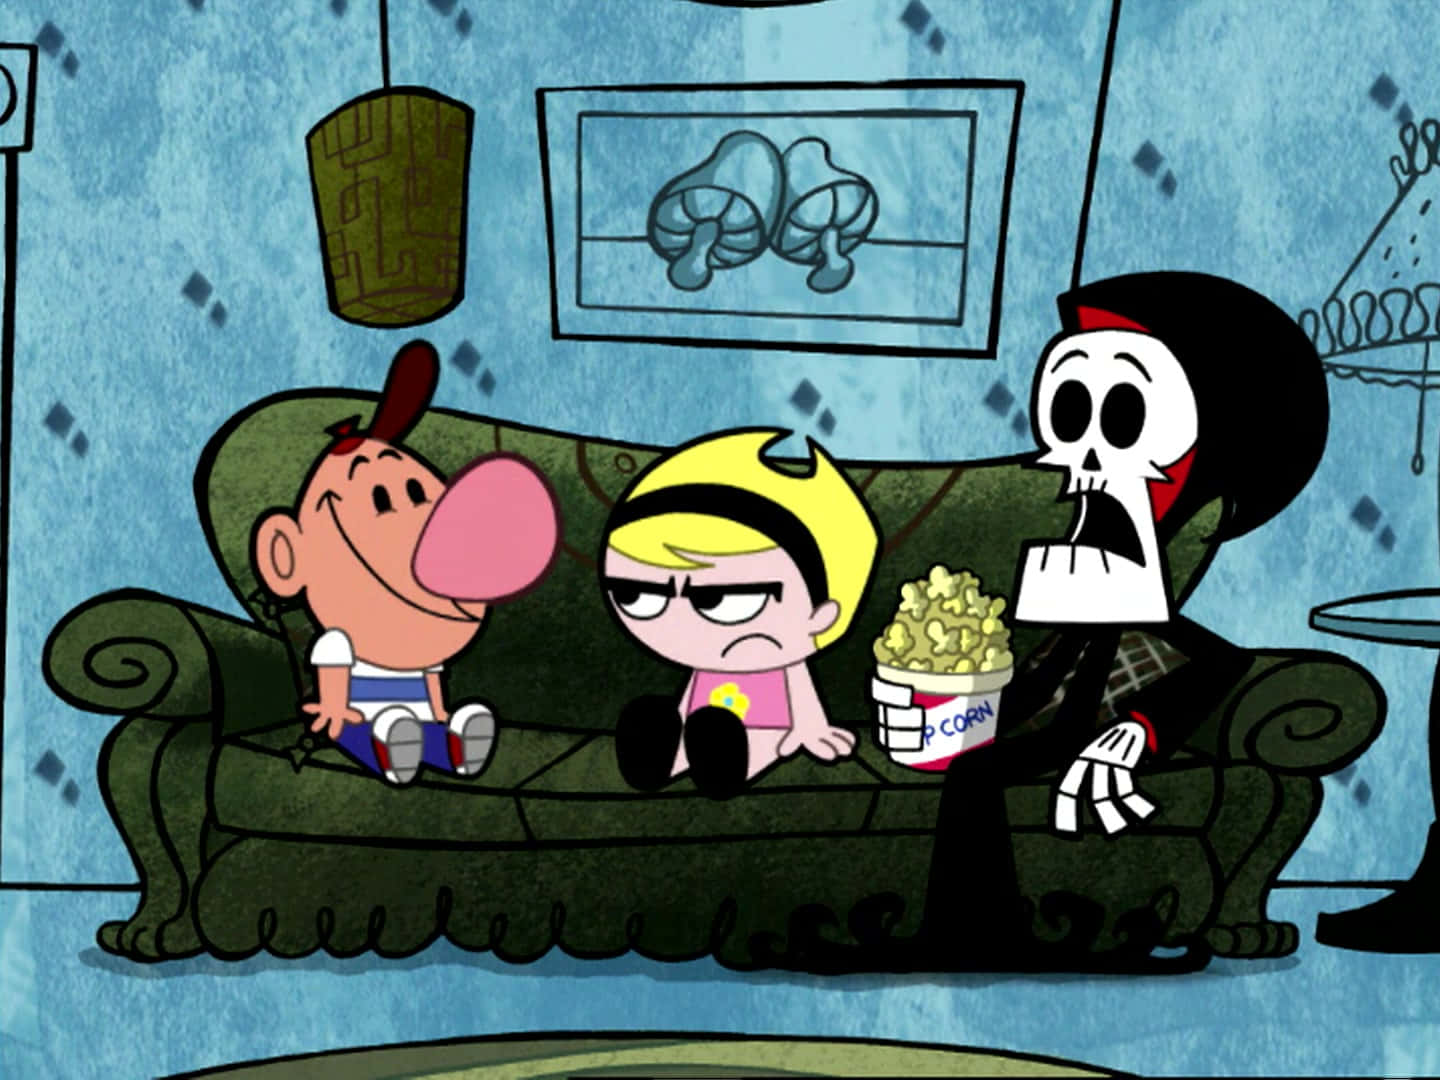 Billy, Mandy, and Grim standing together in a spooky graveyard in The Grim Adventures of Billy&Mandy Wallpaper